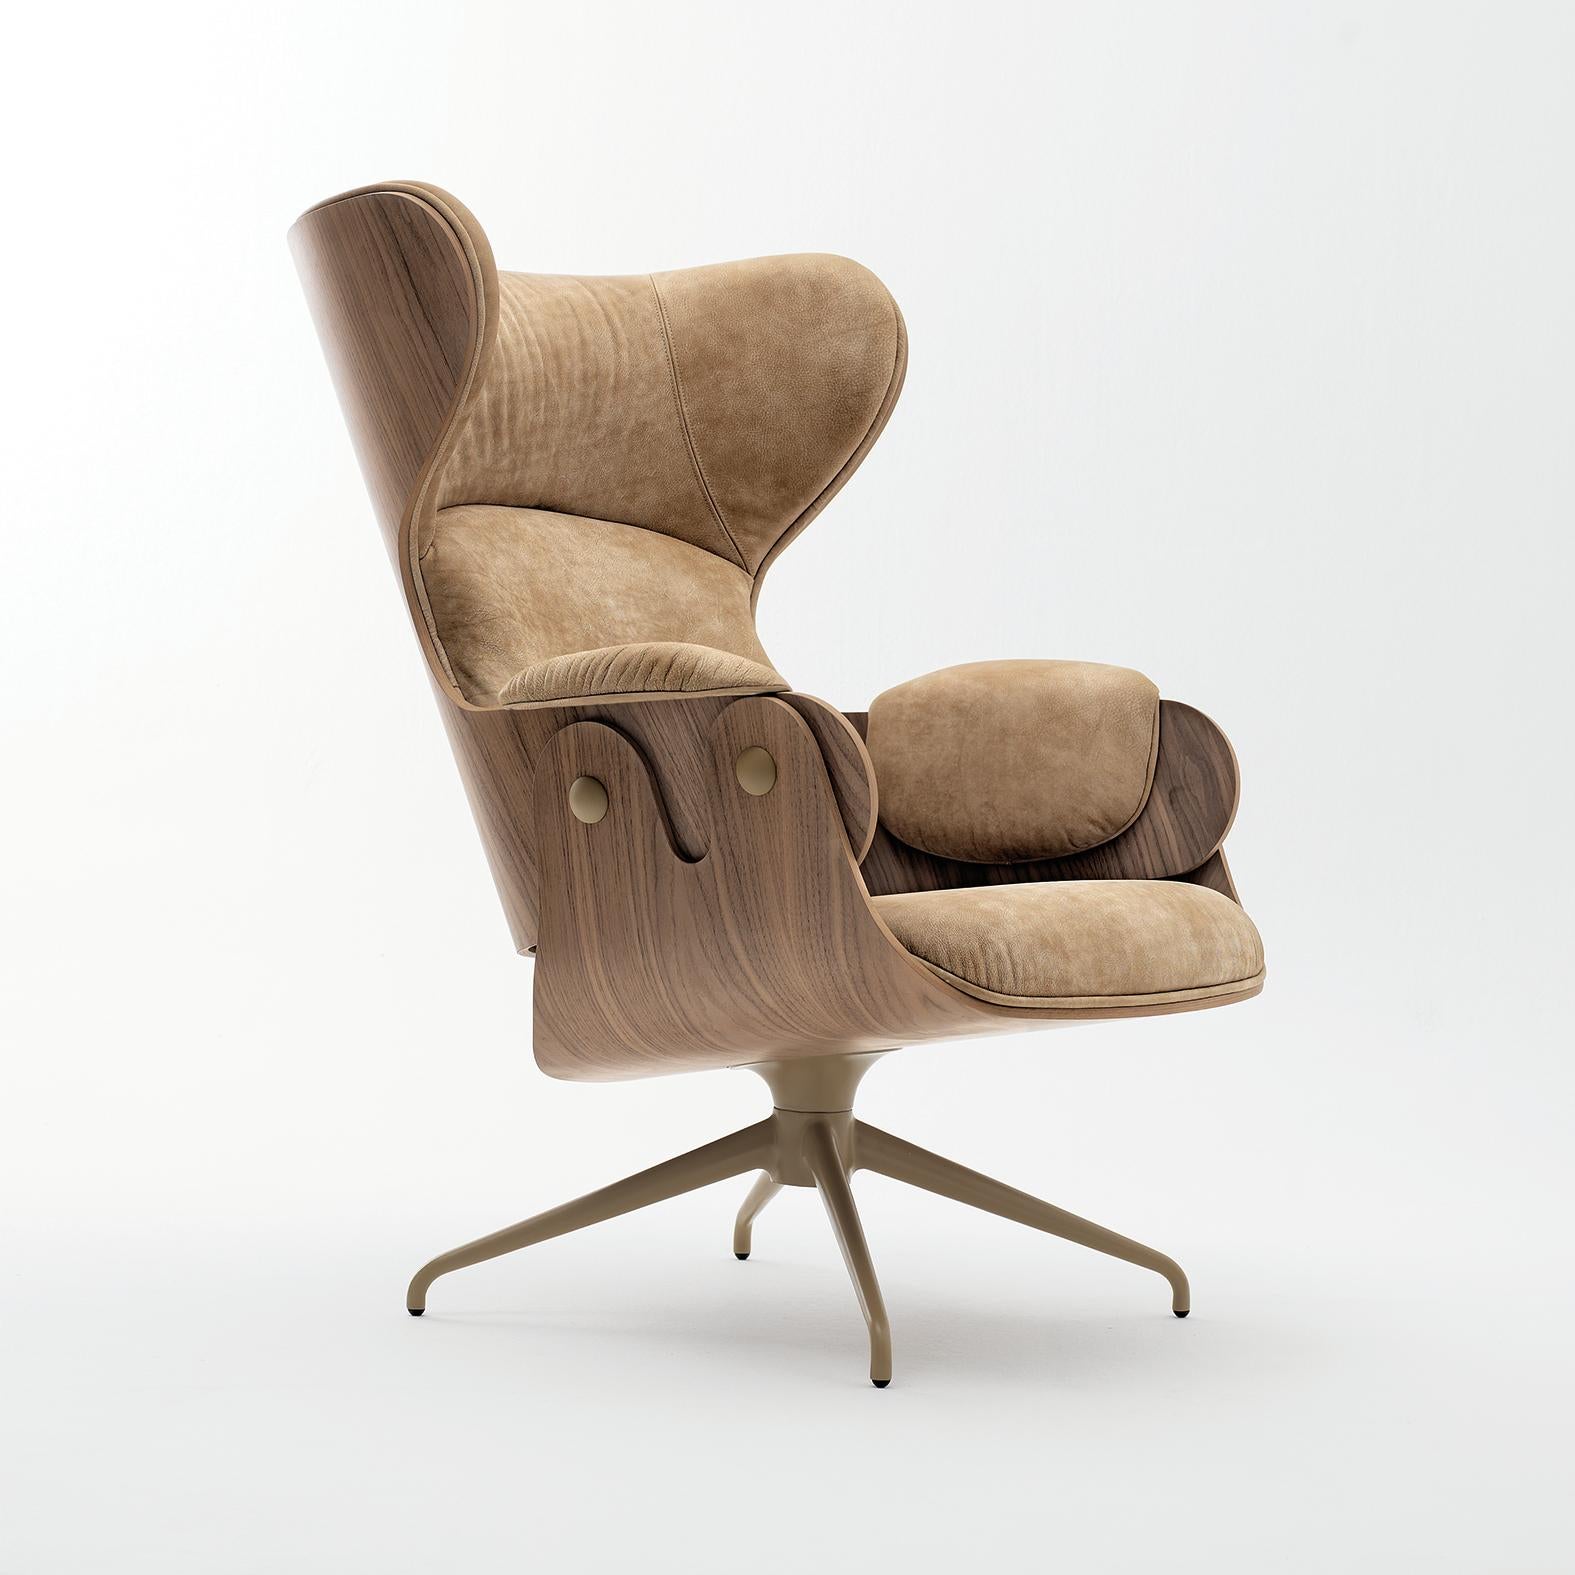 Upholstery Jaime Hayon, Contemporary, Lounger Armchair for BD